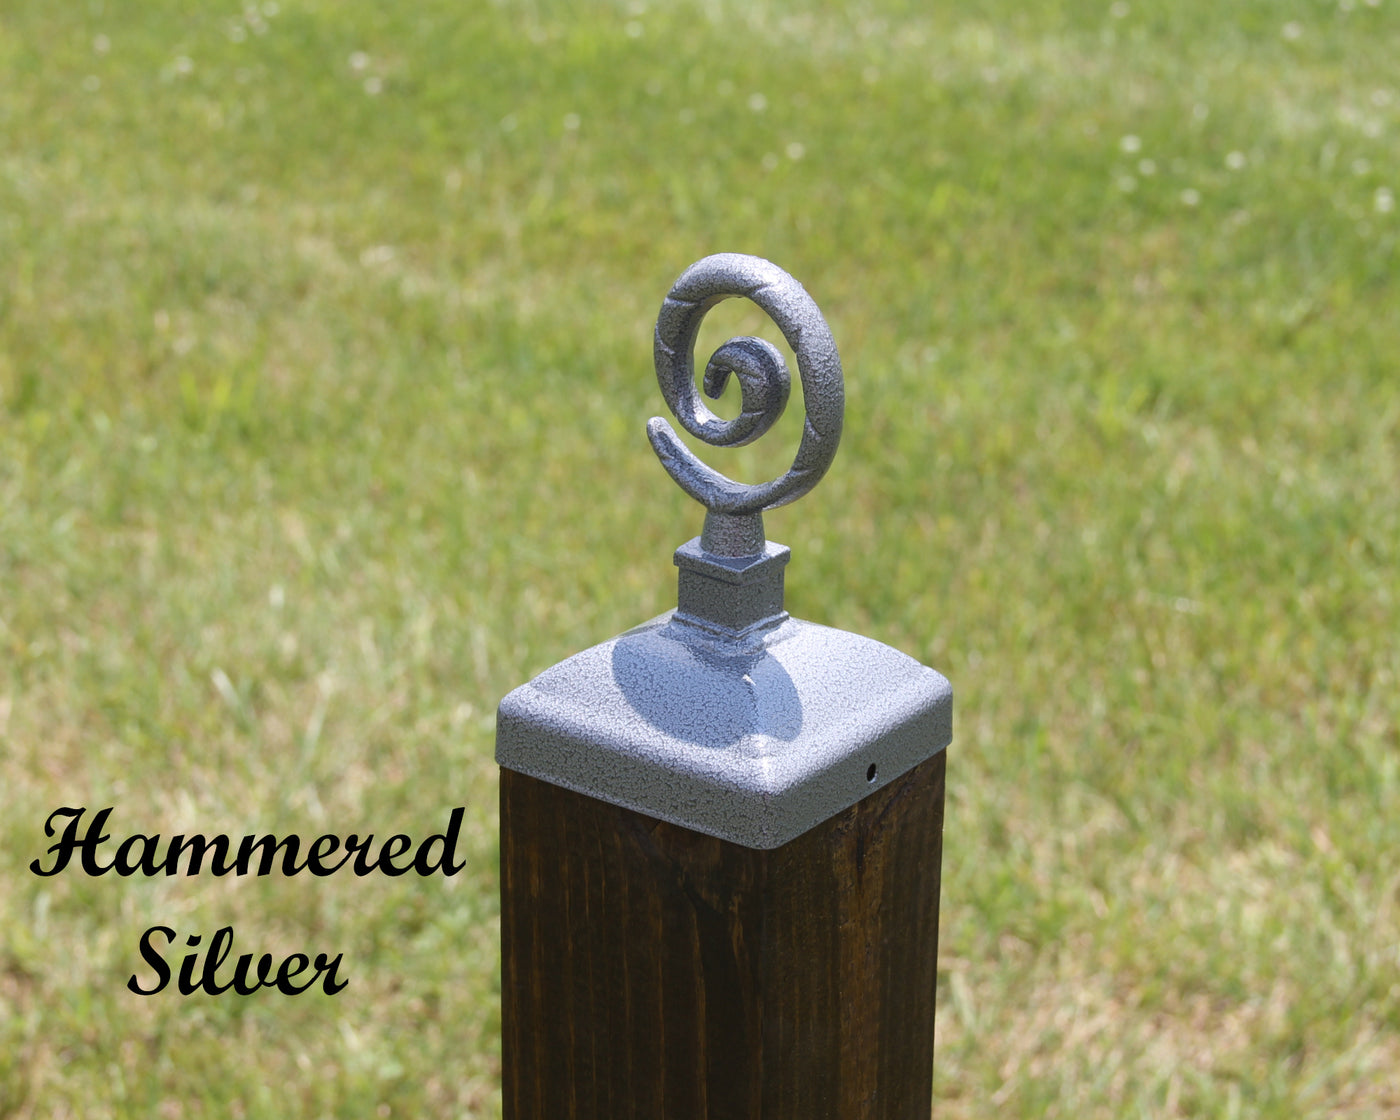 4x4 Spiral Post Cap - Madison Iron and Wood - Post Cap - metal outdoor decor - Steel deocrations - american made products - veteran owned business products - fencing decorations - fencing supplies - custom wall decorations - personalized wall signs - steel - decorative post caps - steel post caps - metal post caps - brackets - structural brackets - home improvement - easter - easter decorations - easter gift - easter yard decor